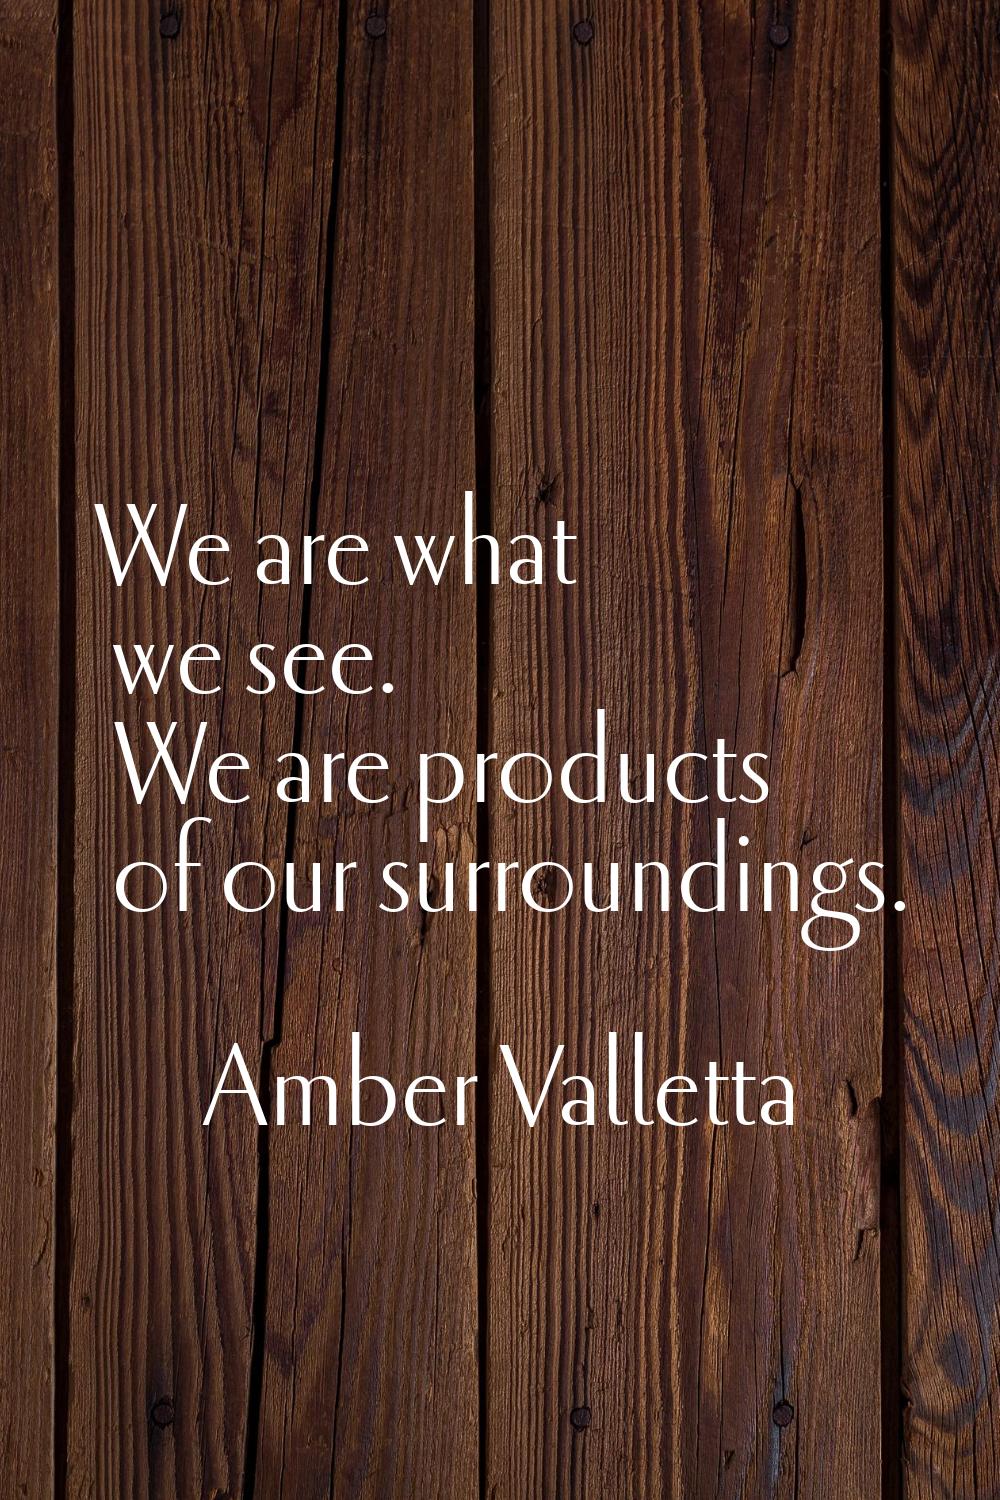 We are what we see. We are products of our surroundings.